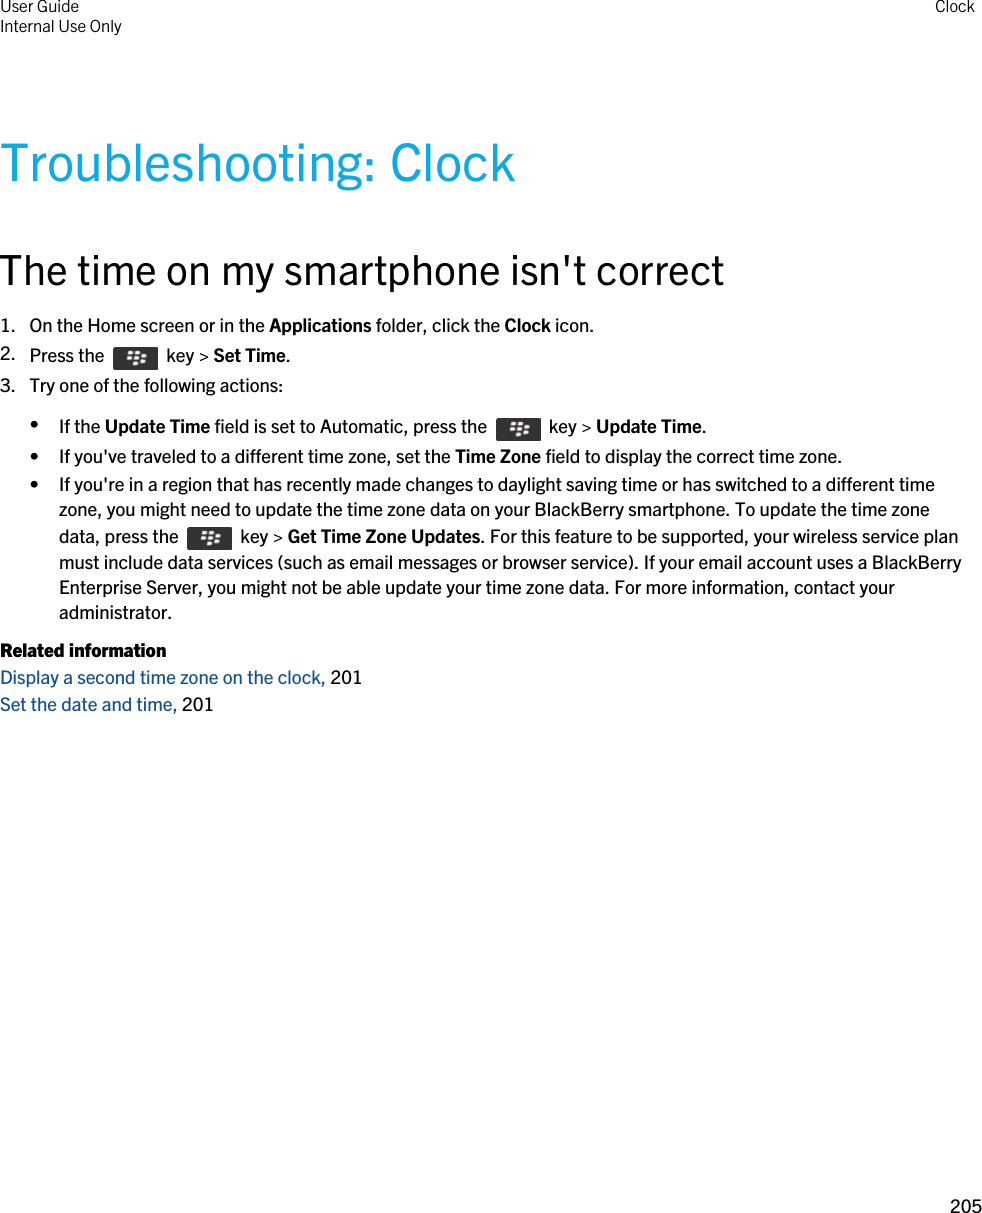 Troubleshooting: ClockThe time on my smartphone isn&apos;t correct1. On the Home screen or in the Applications folder, click the Clock icon.2. Press the    key &gt; Set Time.3. Try one of the following actions:•If the Update Time field is set to Automatic, press the    key &gt; Update Time.• If you&apos;ve traveled to a different time zone, set the Time Zone field to display the correct time zone.• If you&apos;re in a region that has recently made changes to daylight saving time or has switched to a different time zone, you might need to update the time zone data on your BlackBerry smartphone. To update the time zone data, press the    key &gt; Get Time Zone Updates. For this feature to be supported, your wireless service plan must include data services (such as email messages or browser service). If your email account uses a BlackBerry Enterprise Server, you might not be able update your time zone data. For more information, contact your administrator.Related informationDisplay a second time zone on the clock, 201 Set the date and time, 201 User GuideInternal Use Only Clock205 